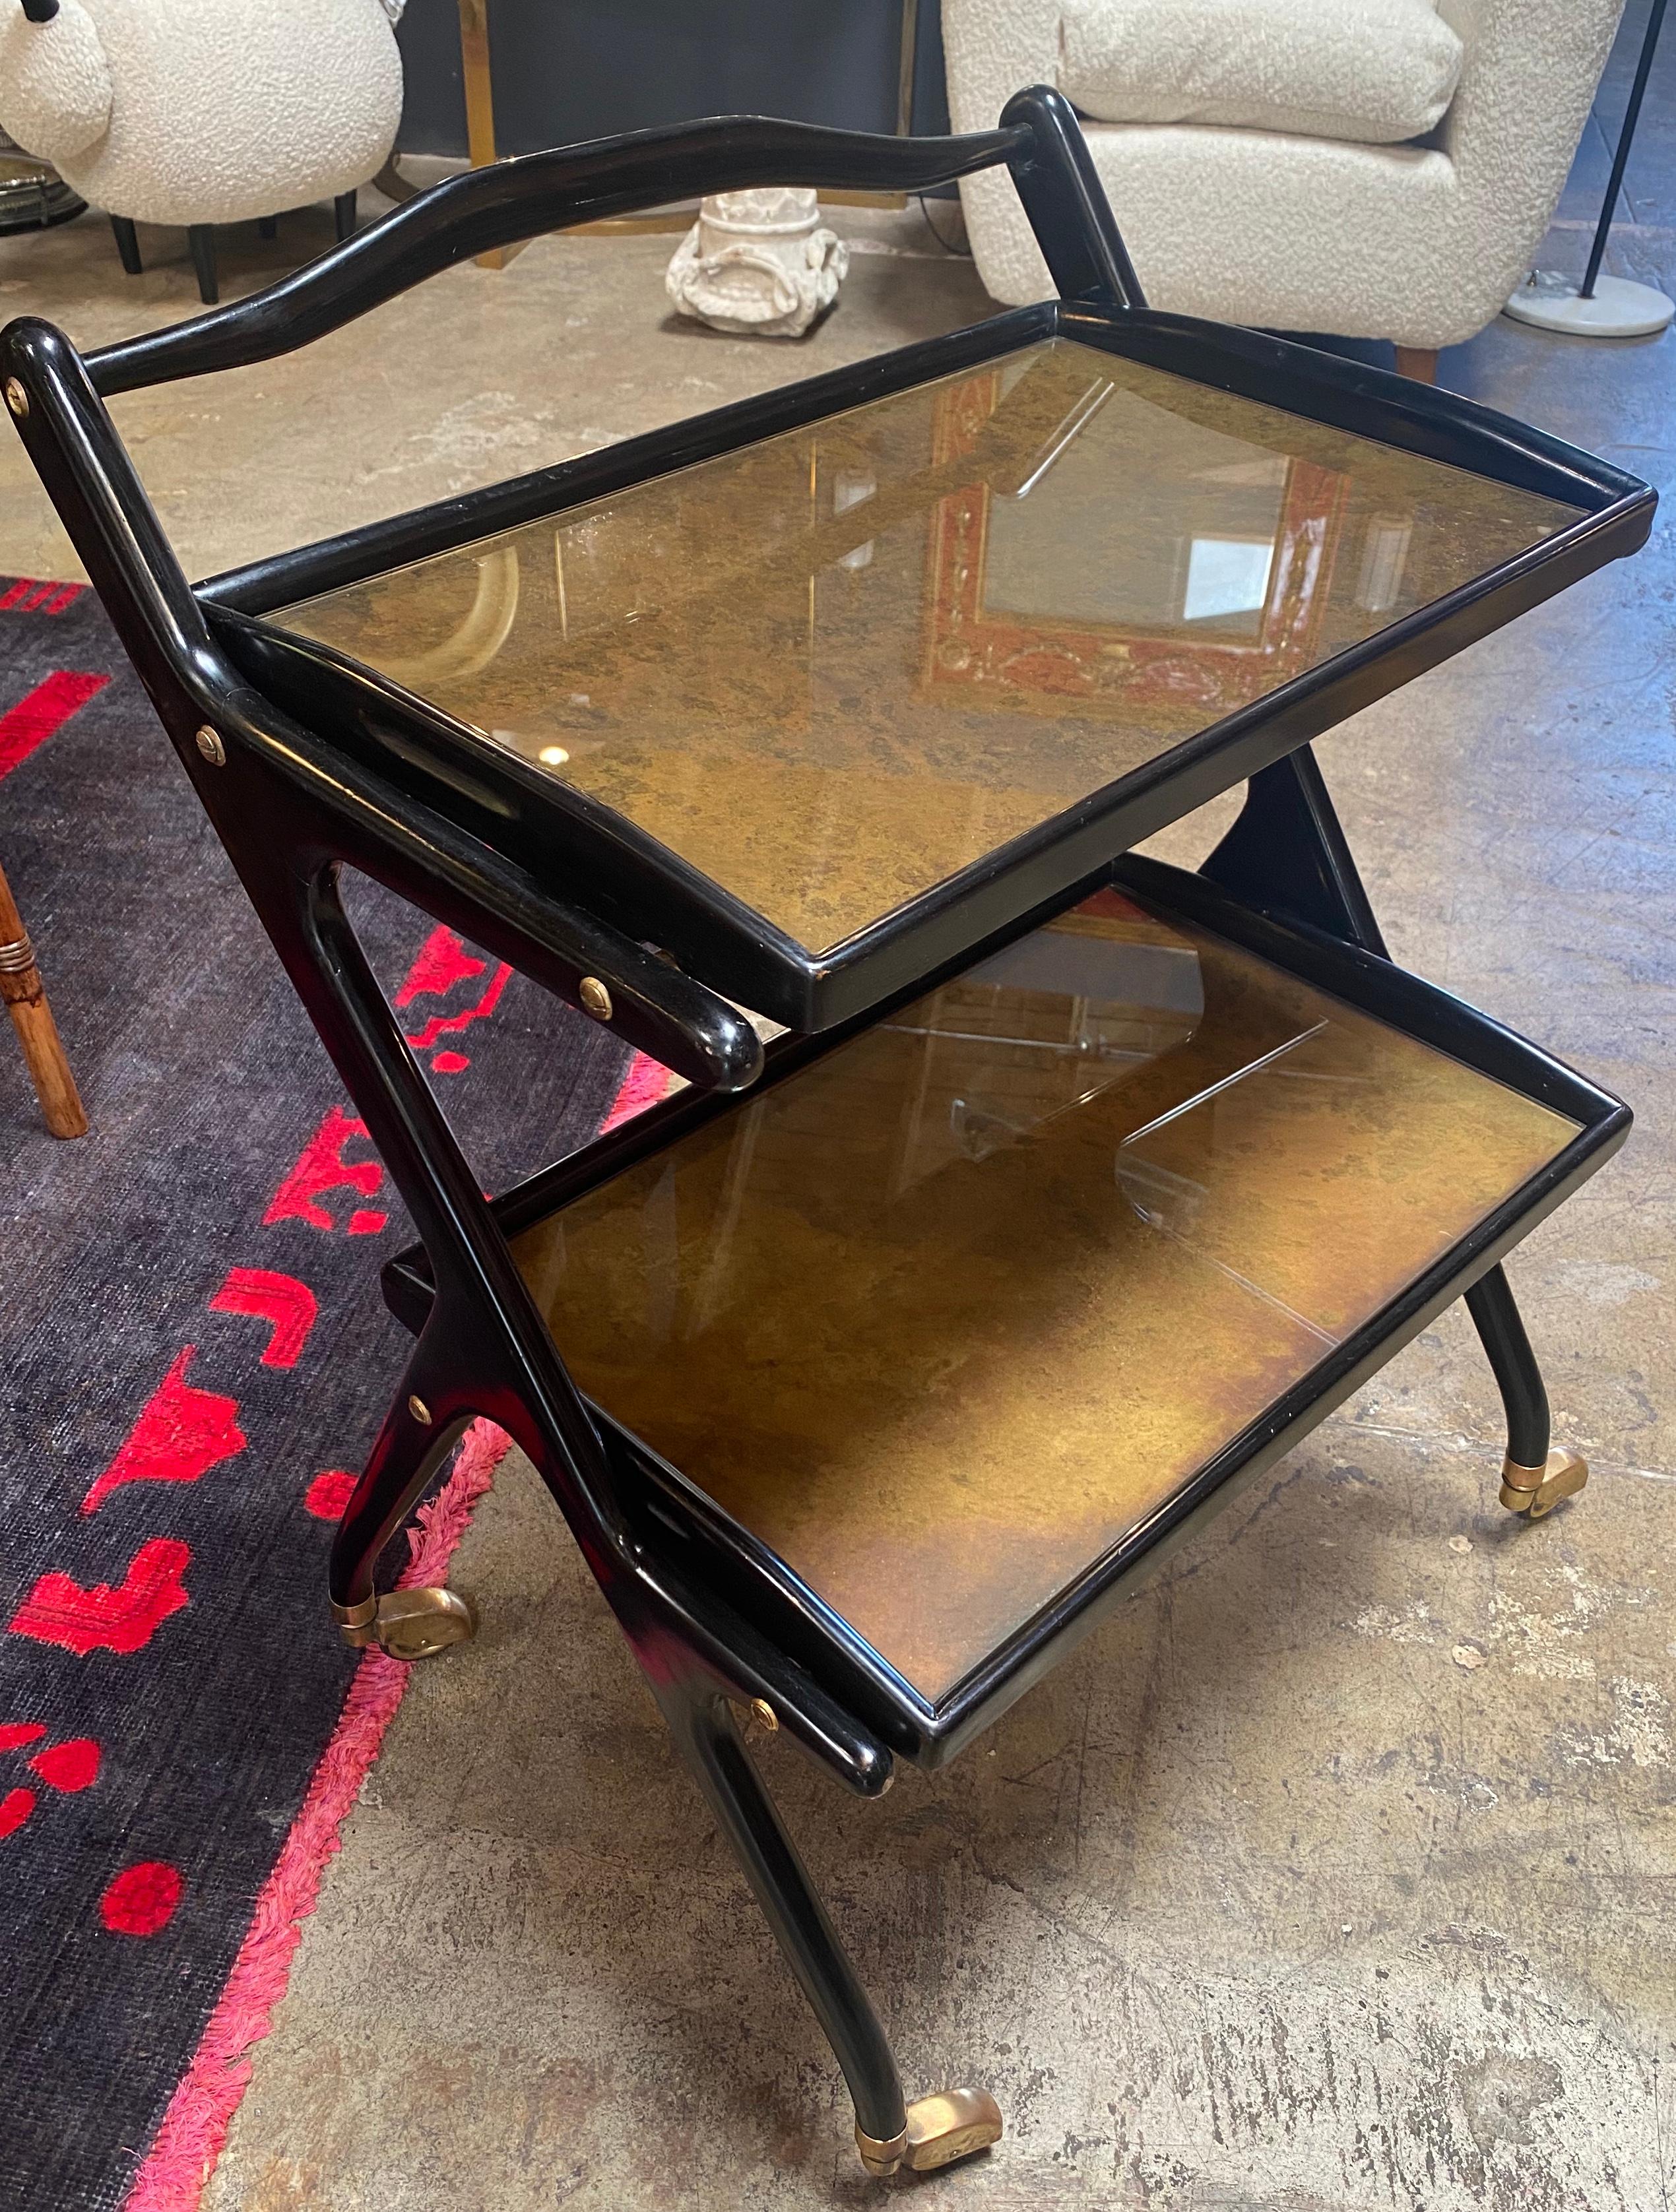 Beautiful Italian mid century modern bar cart whit removable trays and brass details. The conditions are very good and iThe bar cart is ready to be insert in a mid century living.